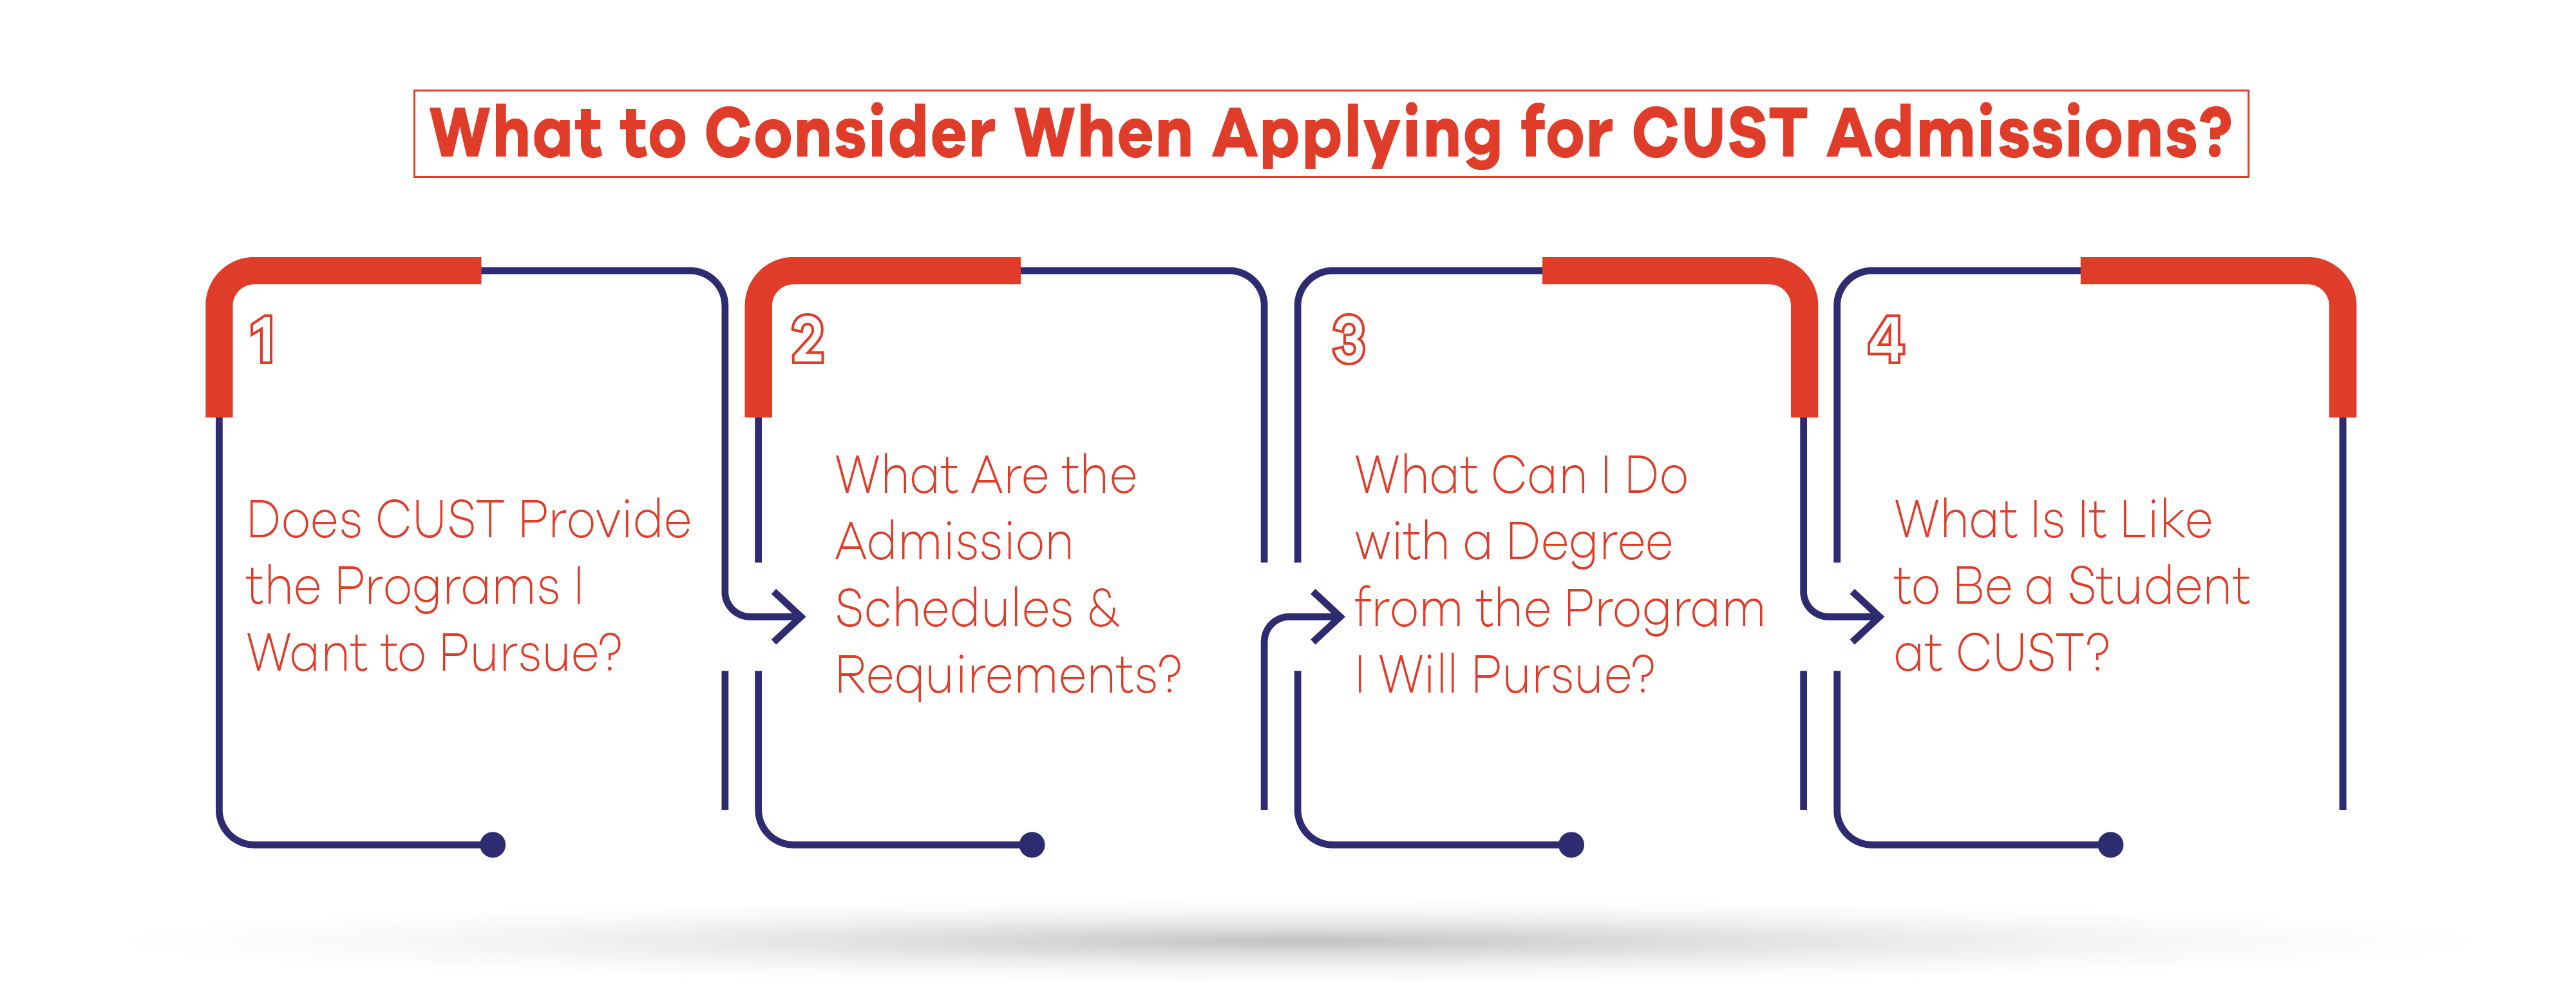 What to Consider When Applying for CUST Admissions? 